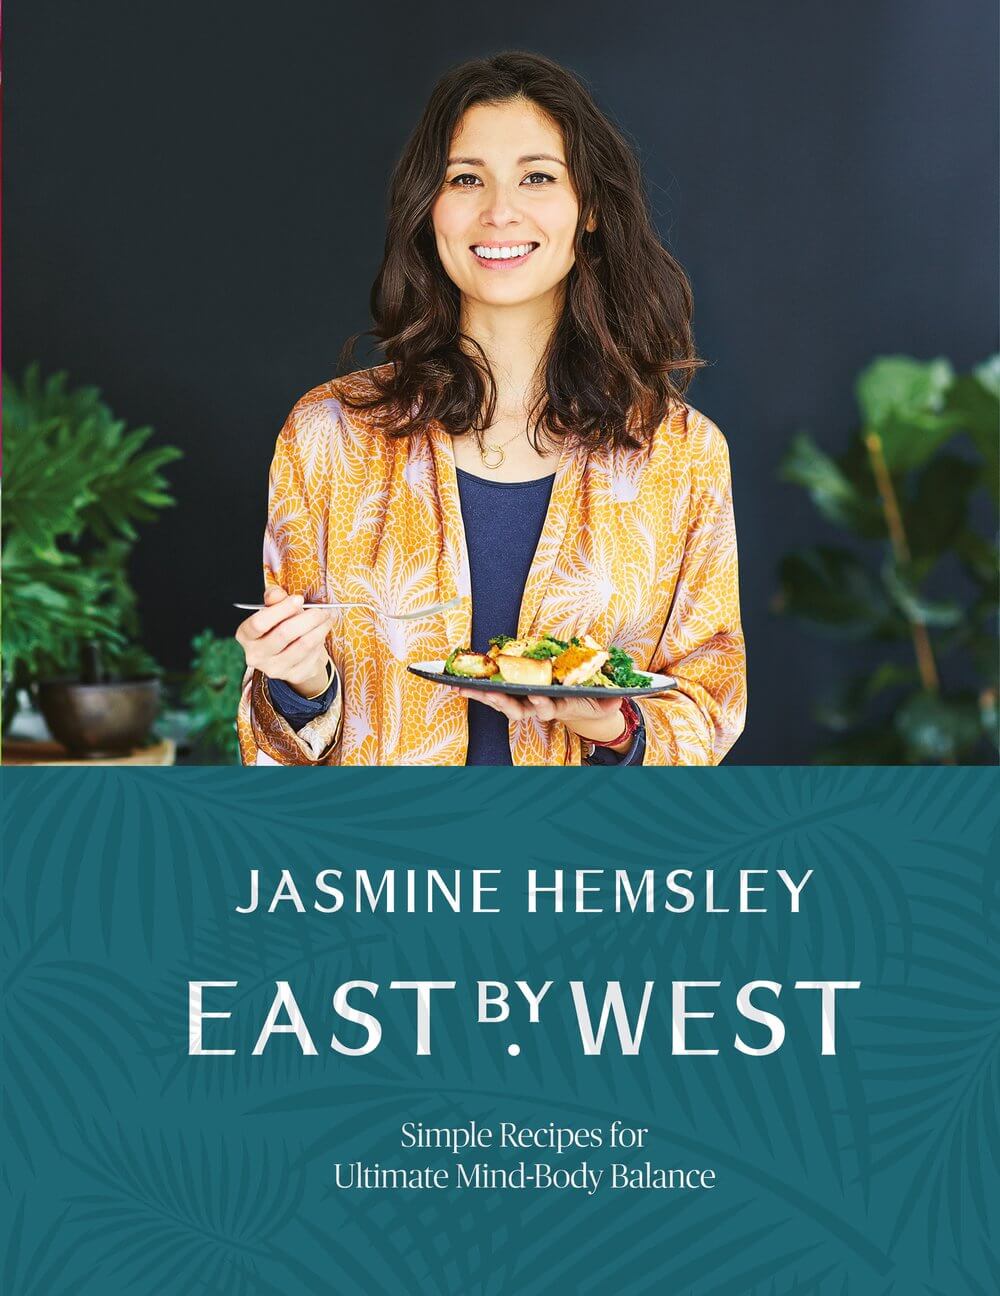 East by West by Jasmine Hemsley